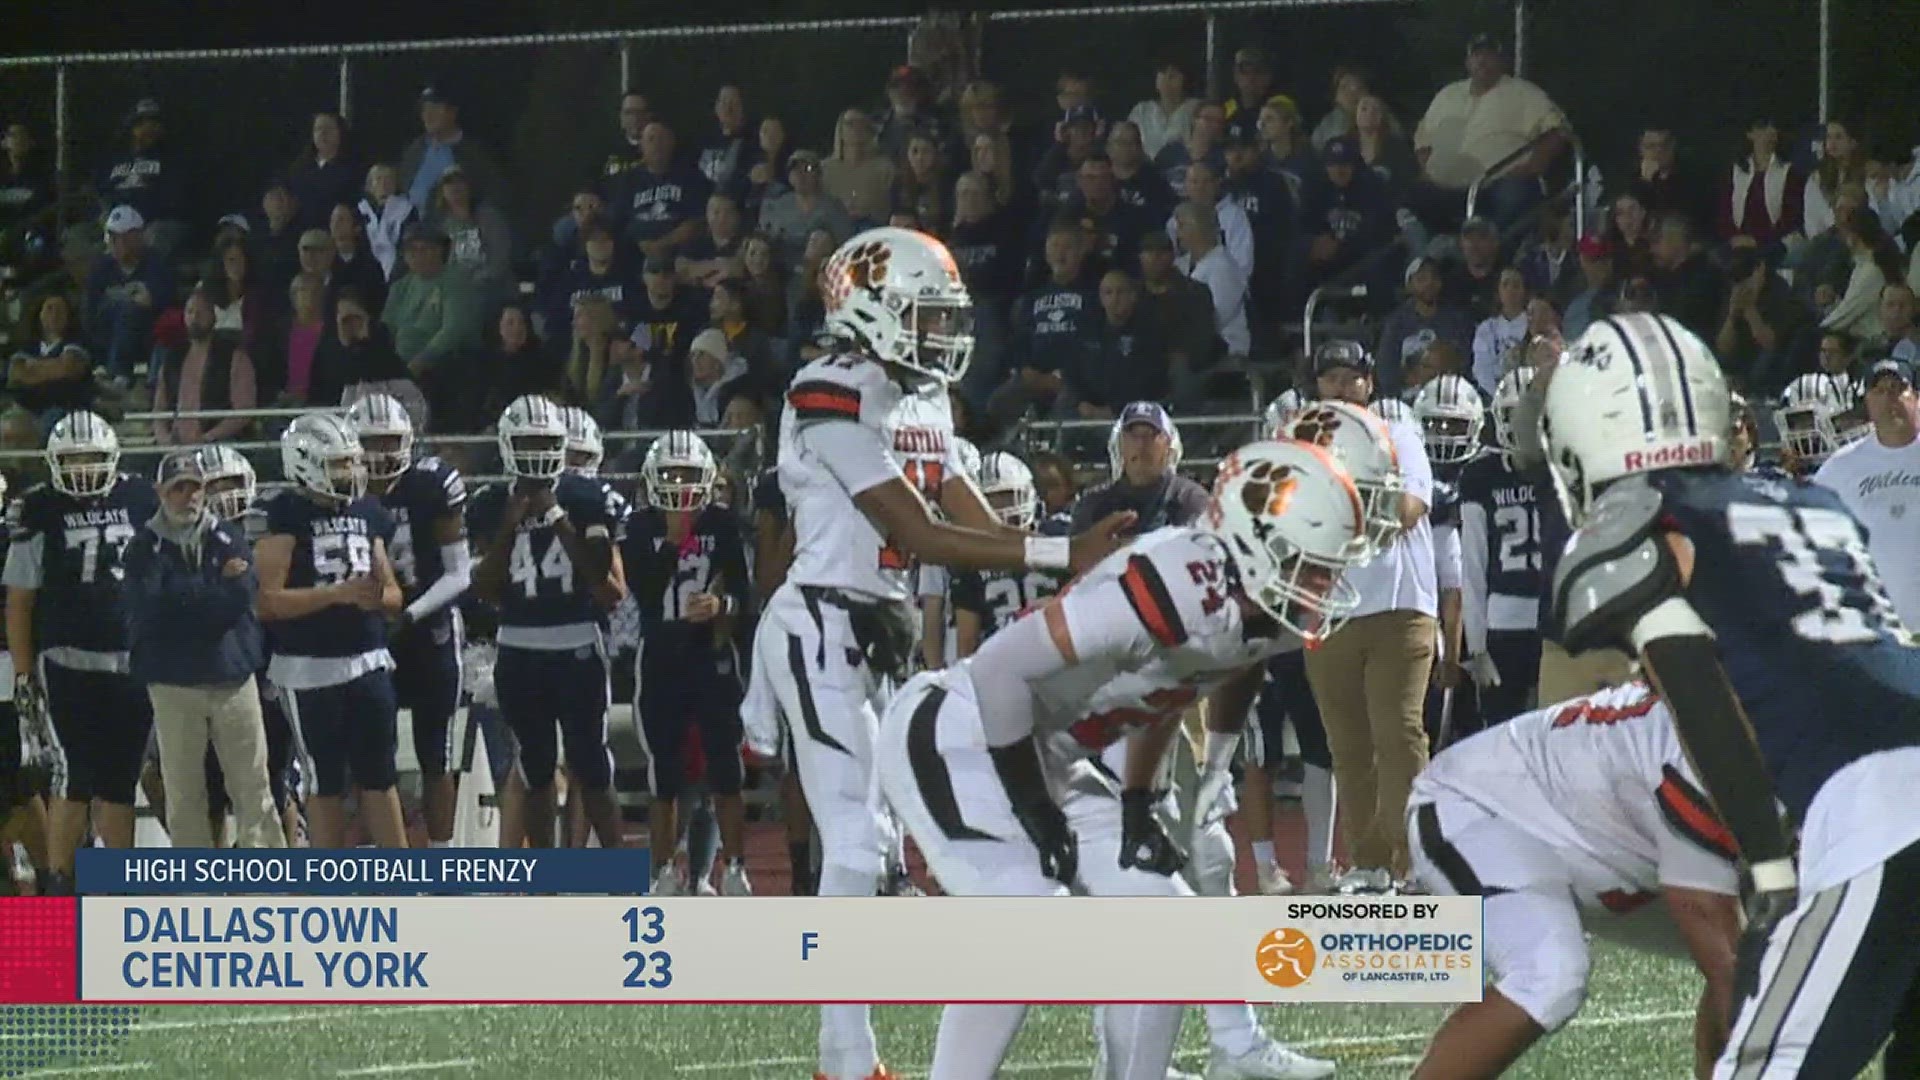 Central York edges Dallastown to stay perfect on the season.